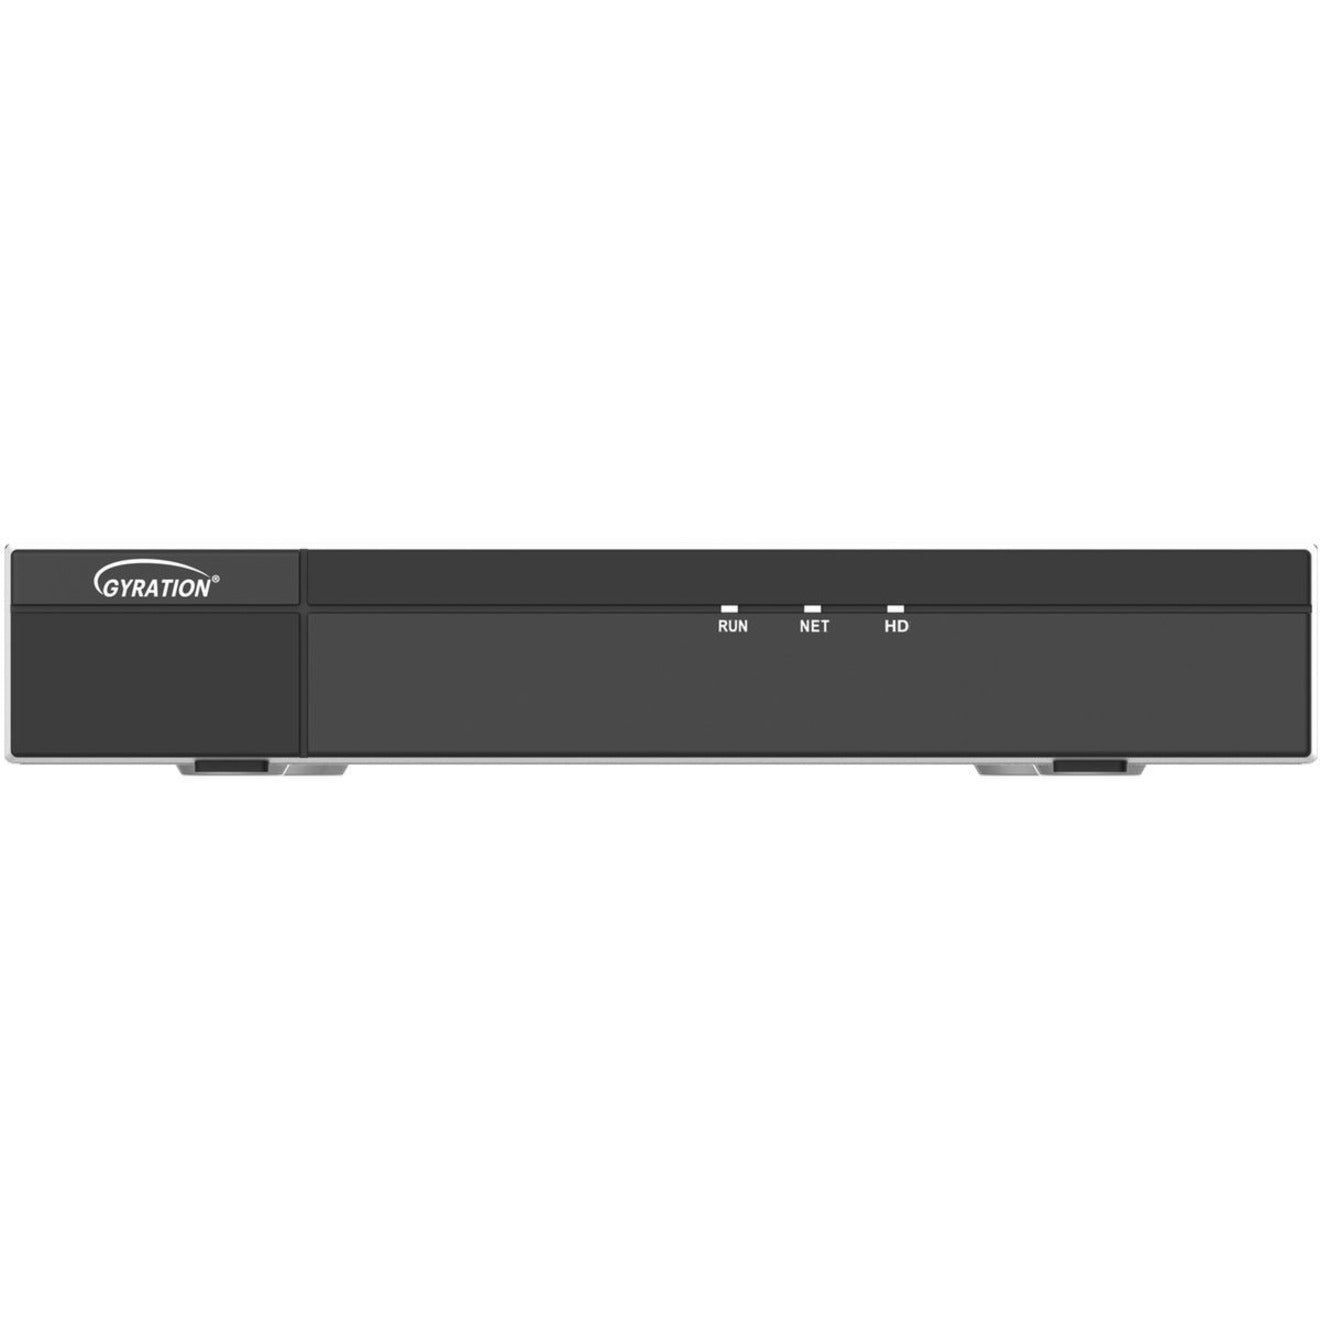 Gyration CYBERVIEW N8-TAA 8-Channel Network Video Recorder With PoE, TAA-Compliant